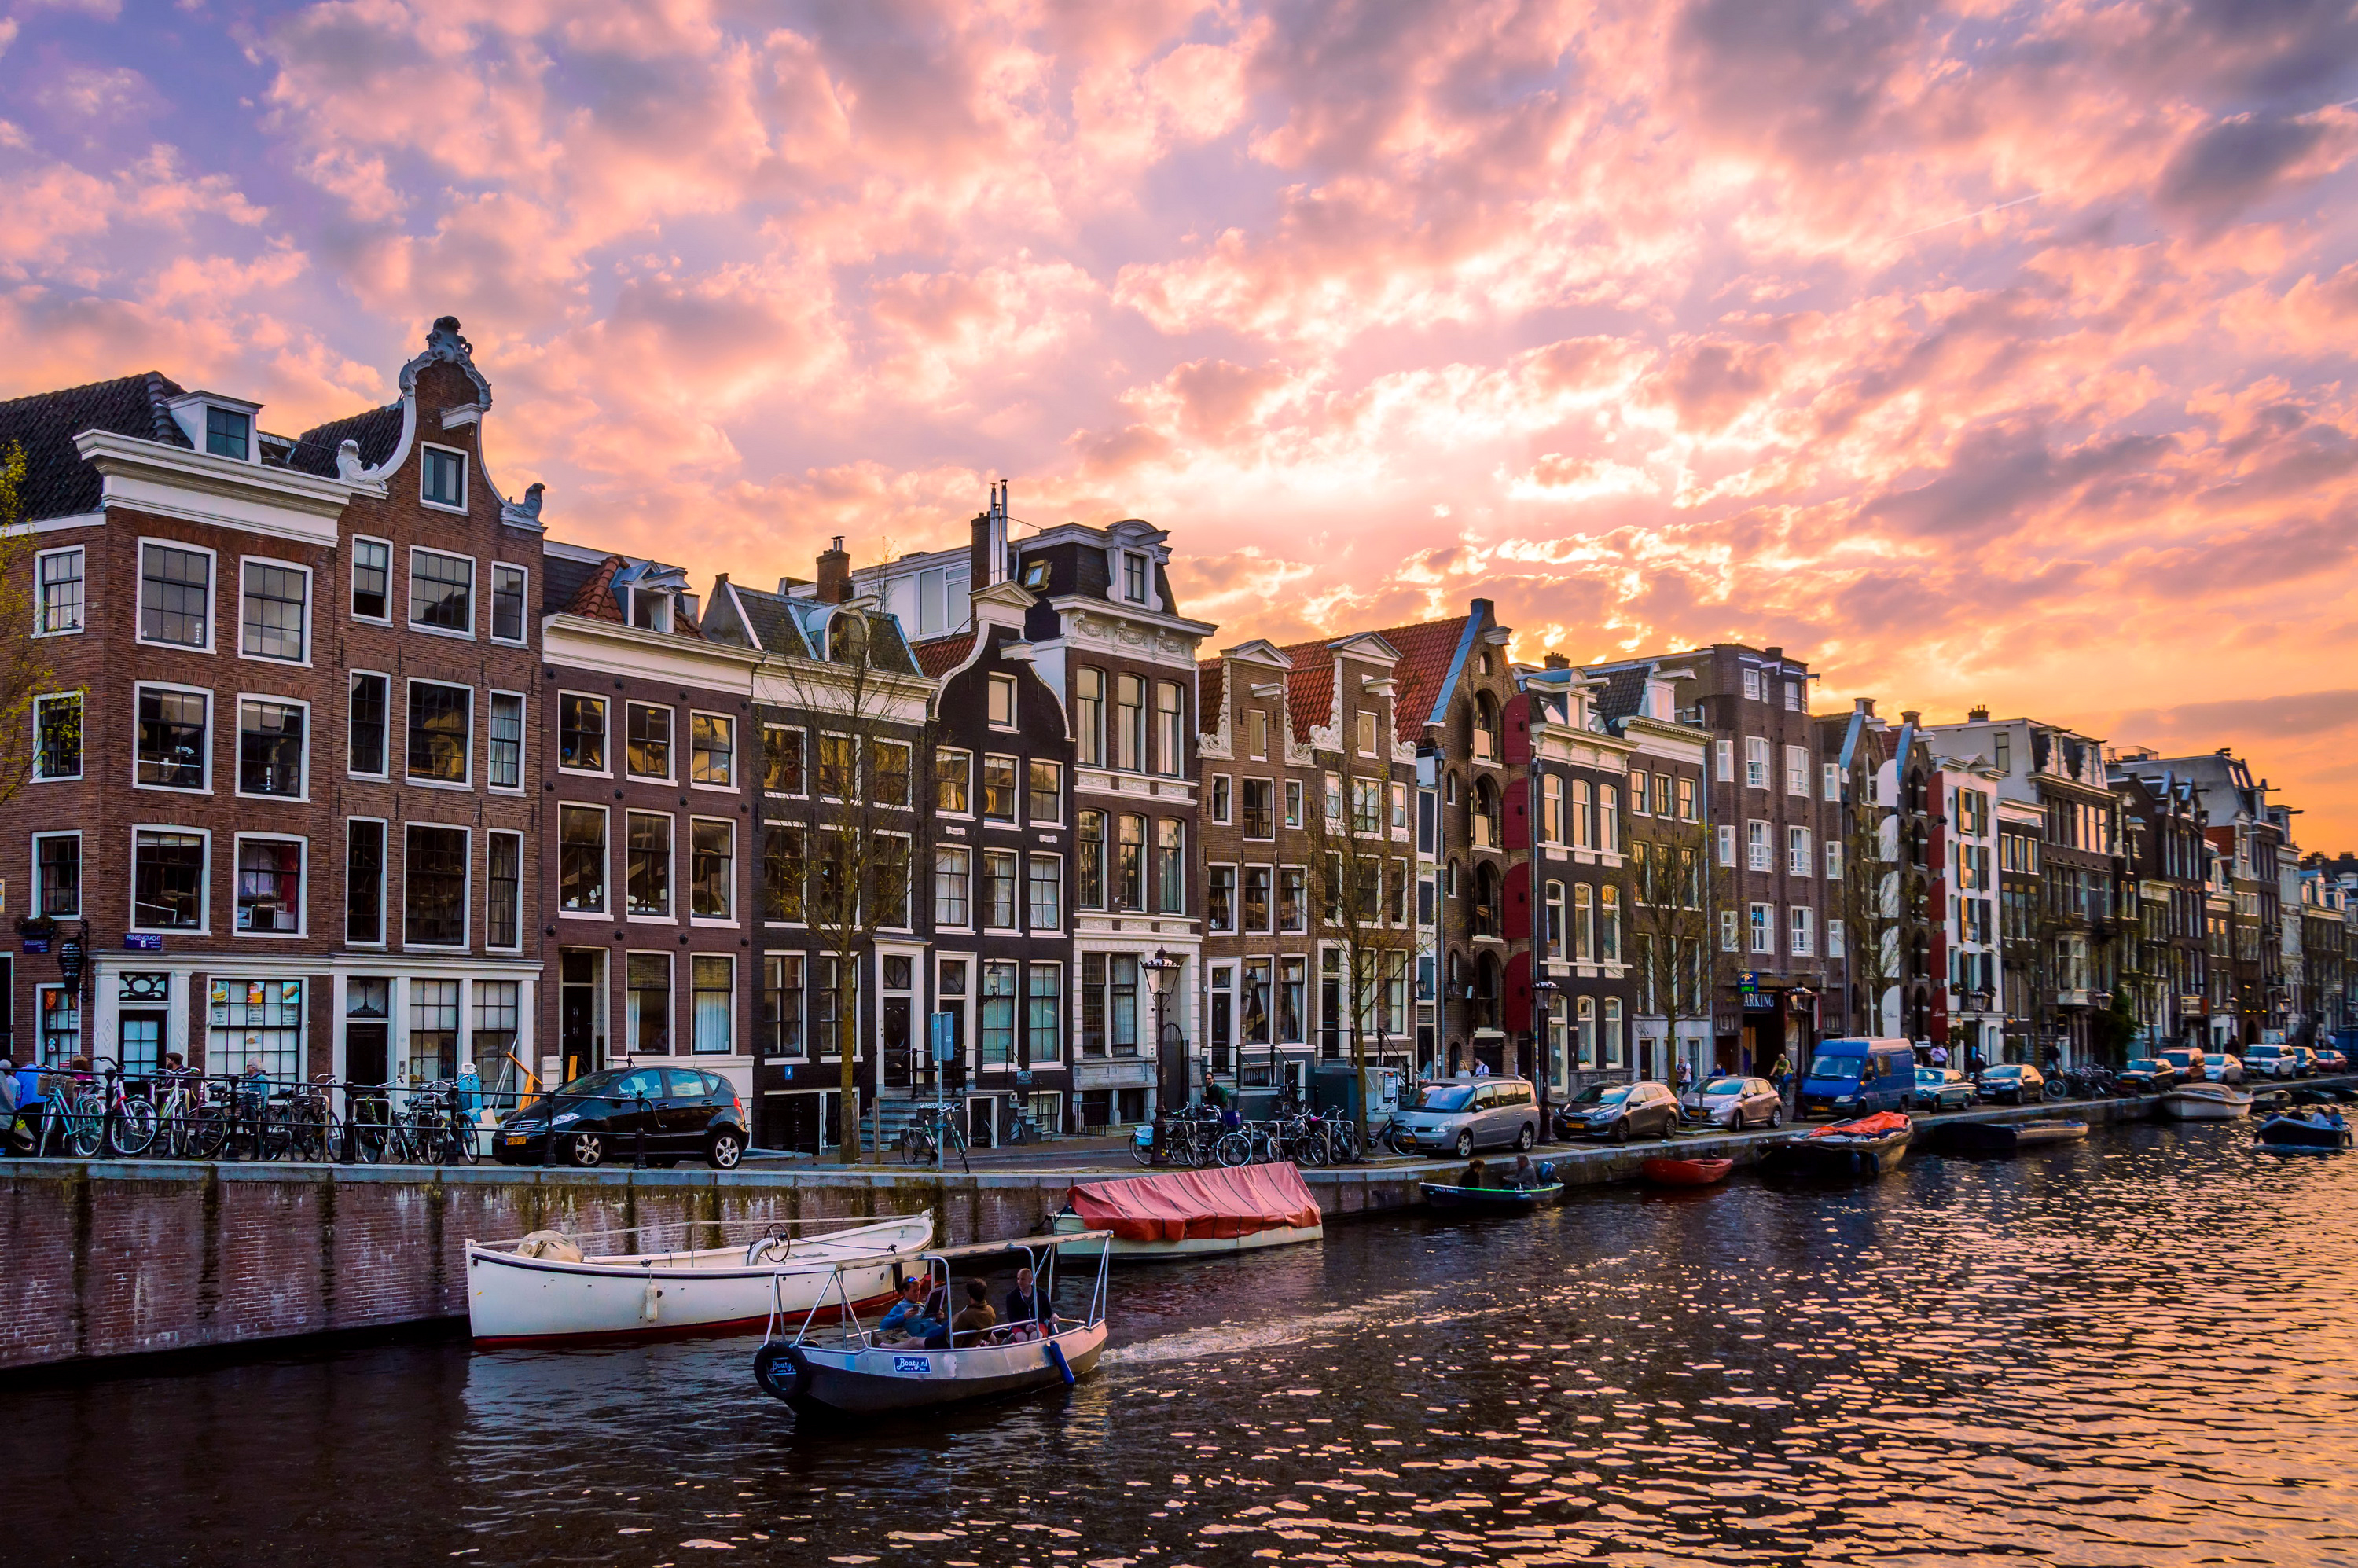 amsterdam, netherlands, man made, boat, canal, house, cities